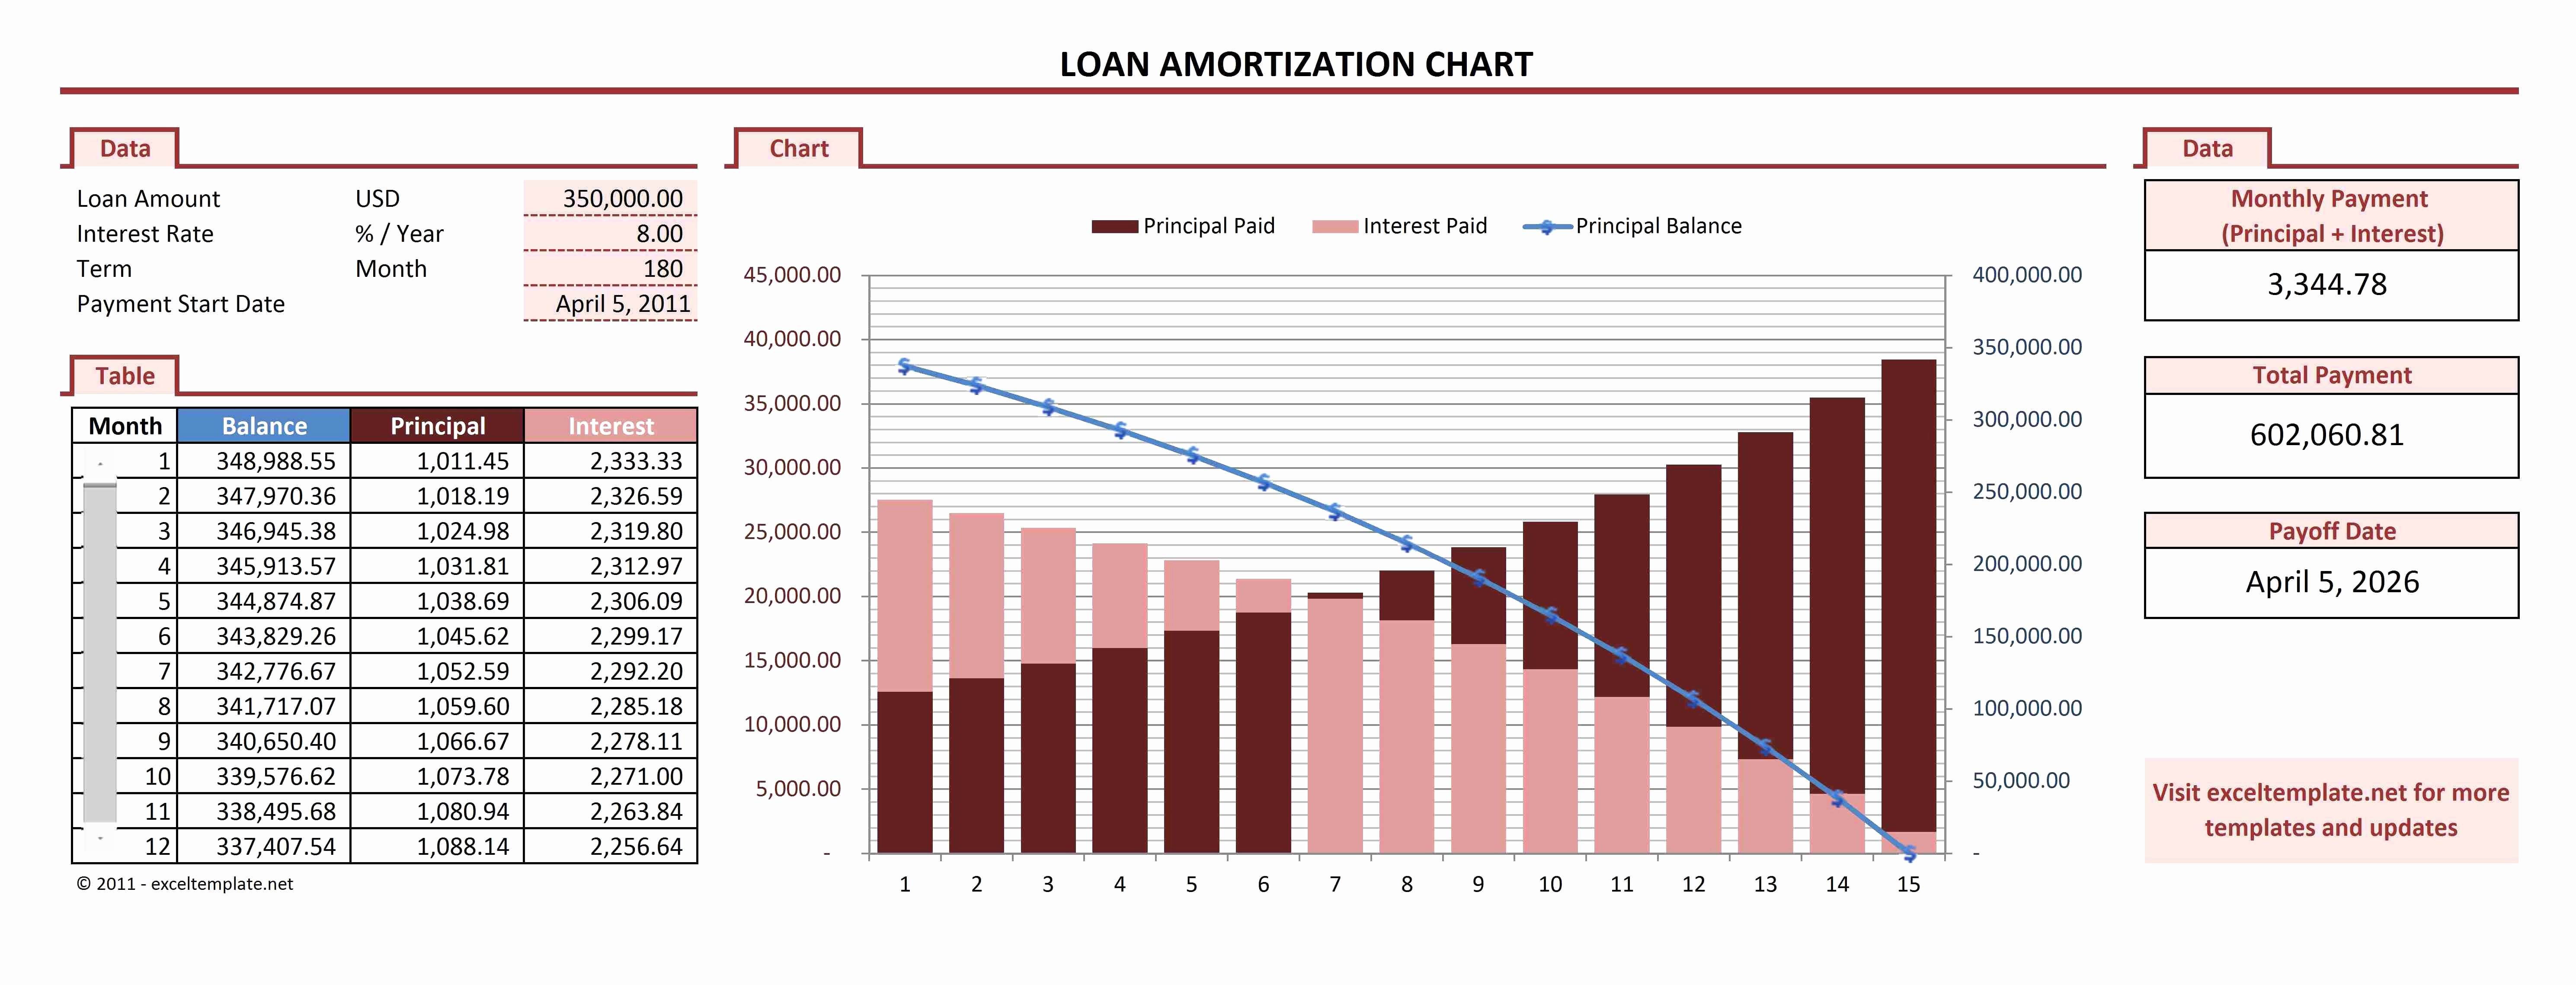 Auto Amortization Schedule Excel Inspirational Loan Amortization Schedule Spreadsheet In Auto Loan